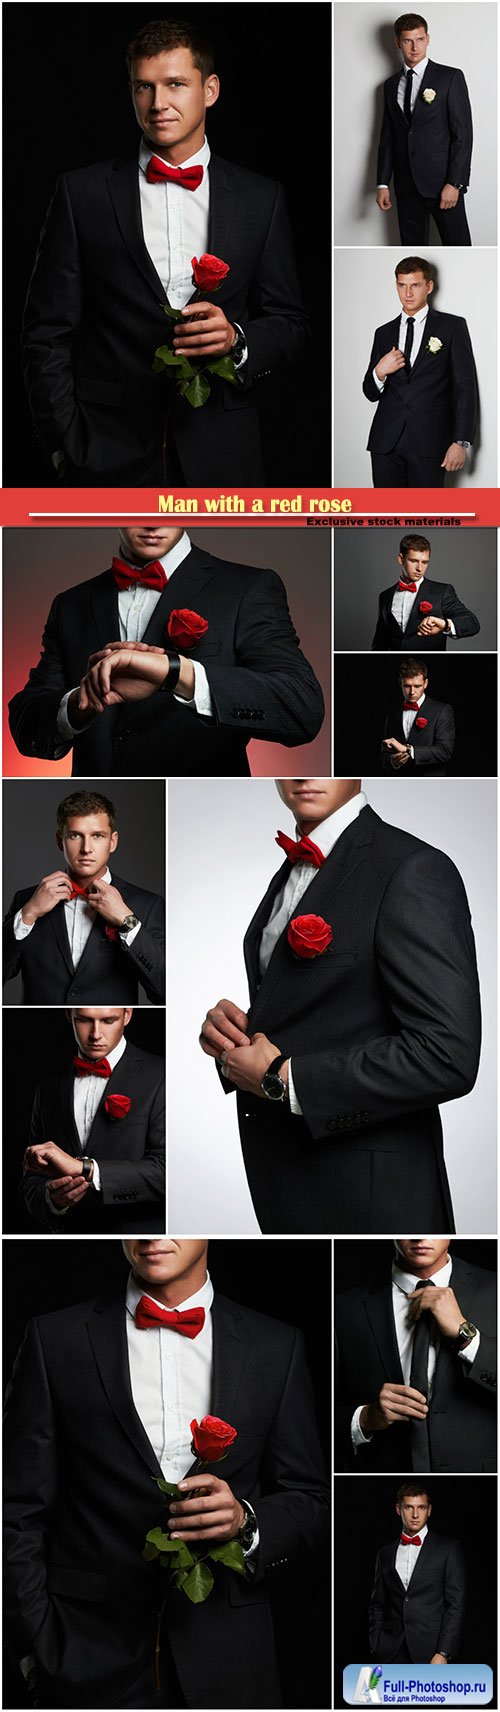 Man with a red rose, a bridegroom in a black suit